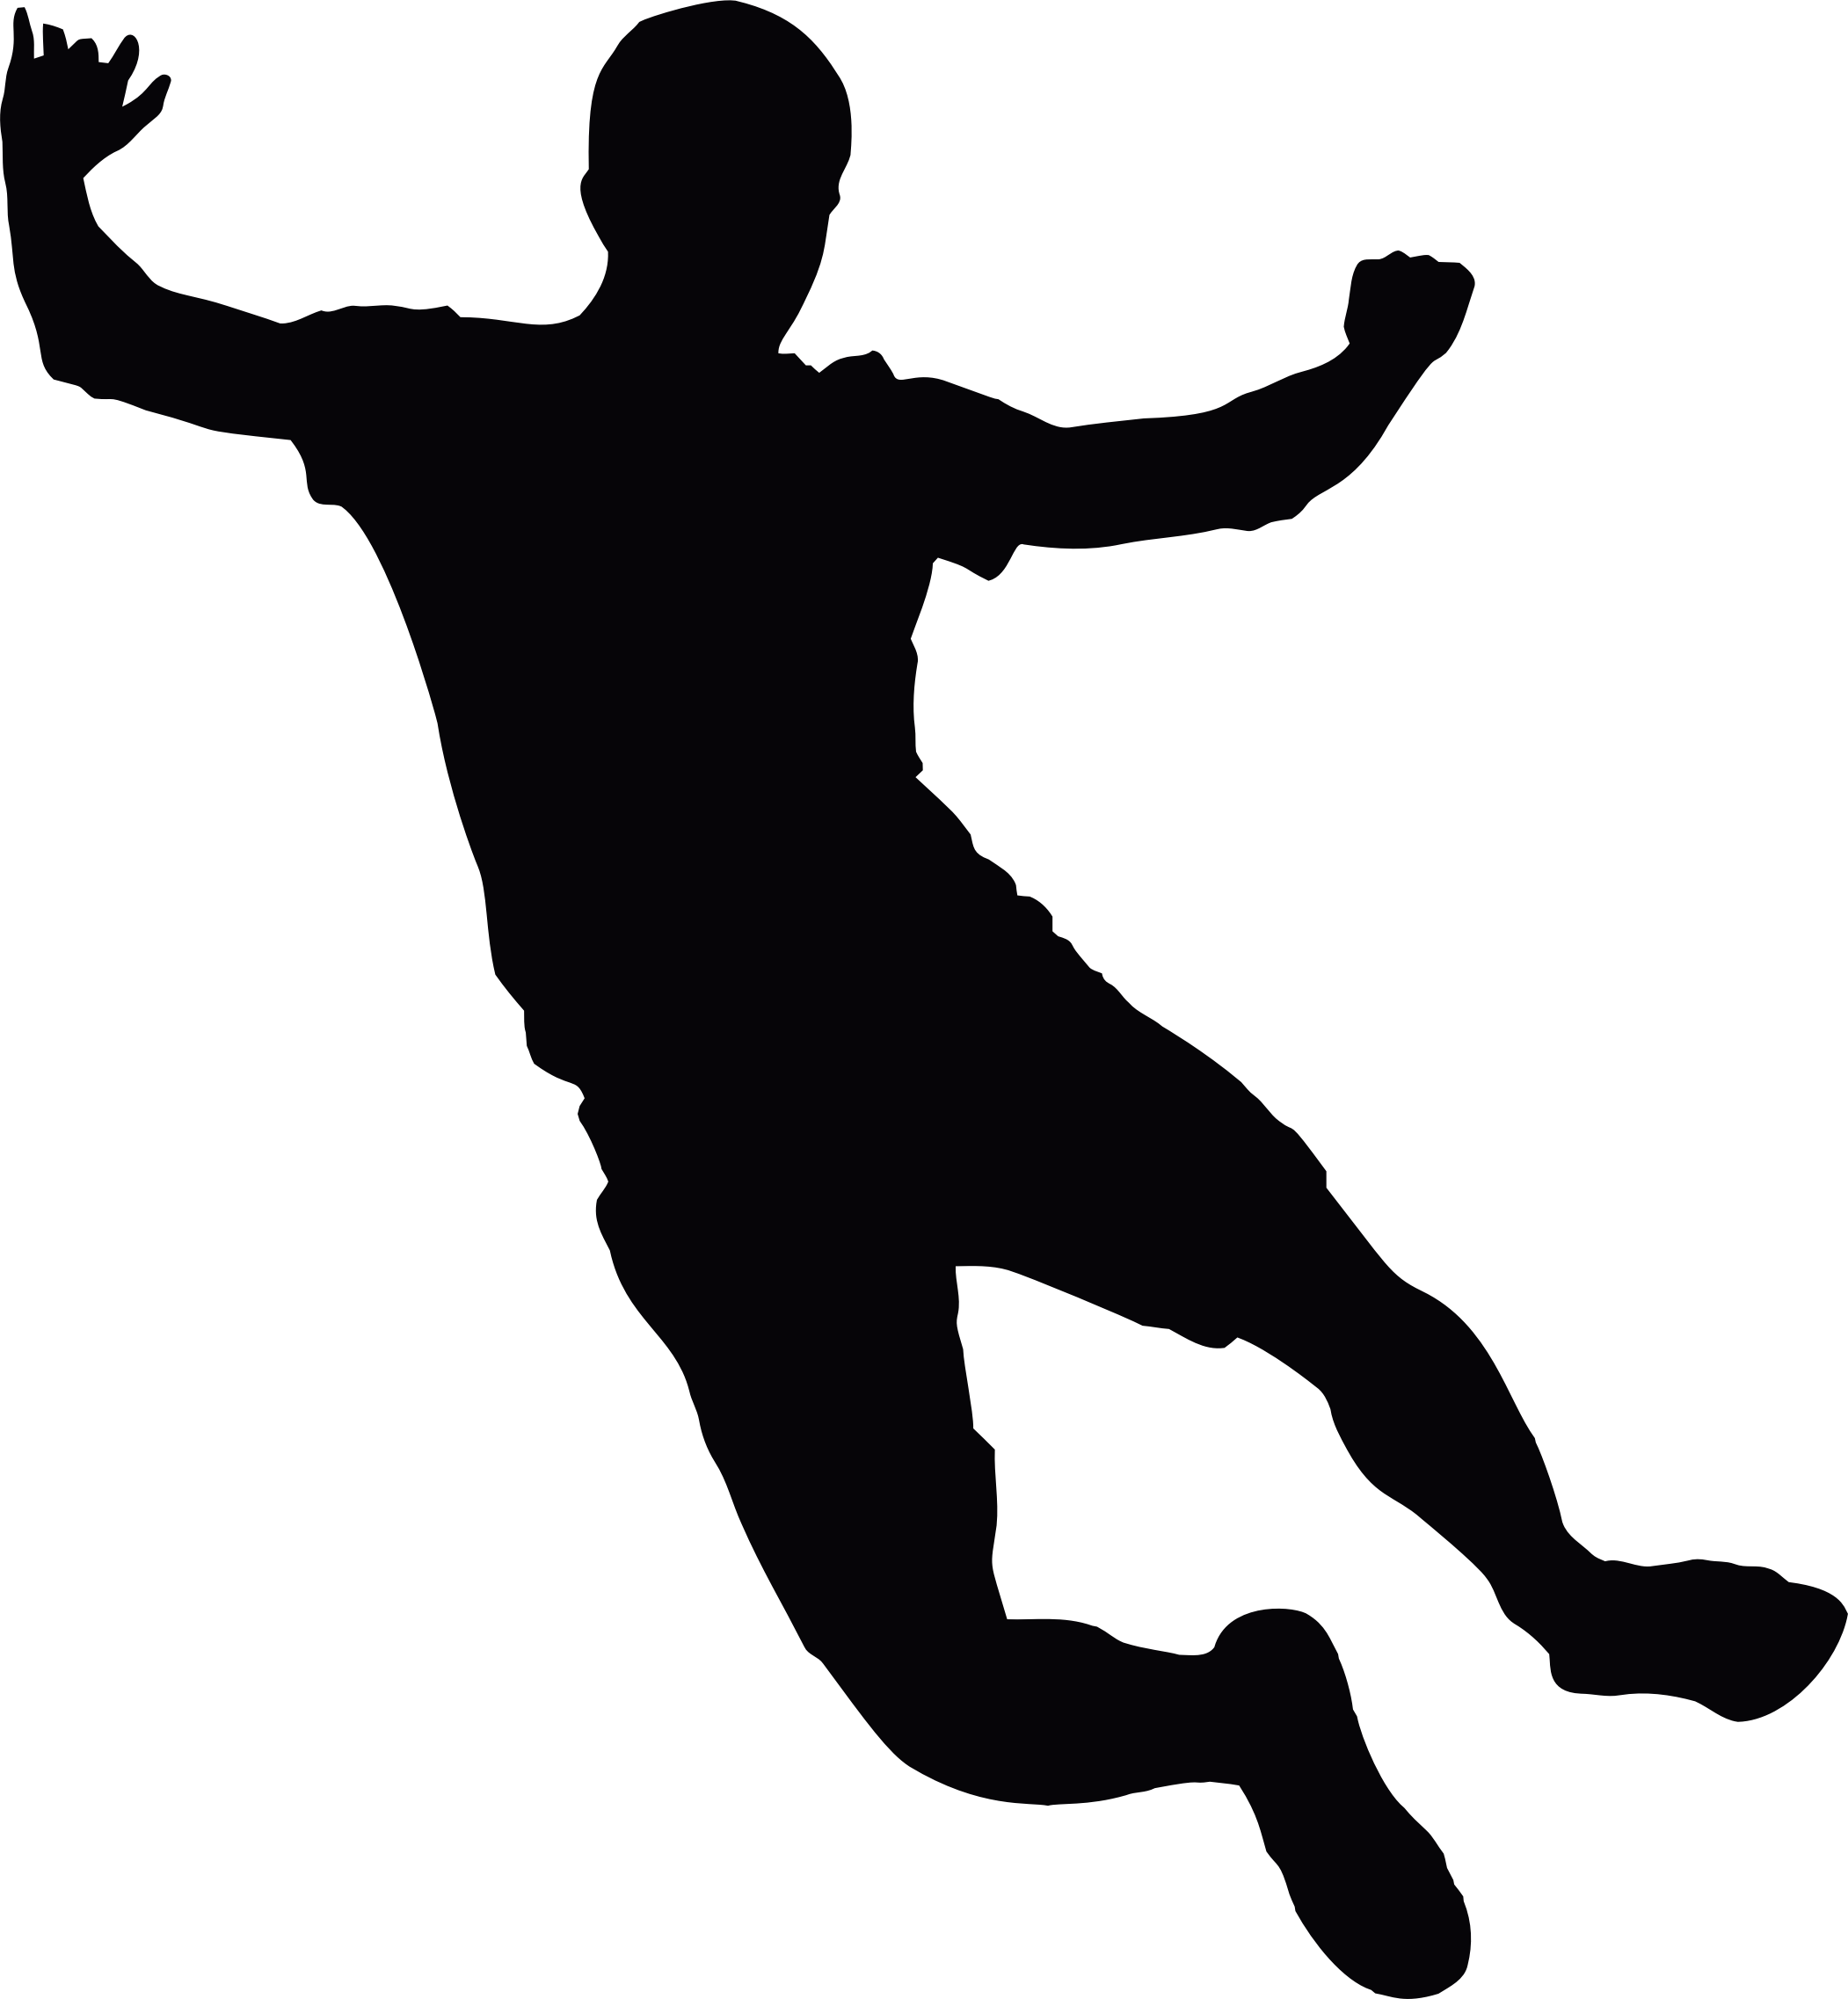 free clip art jumping silhouette - photo #6